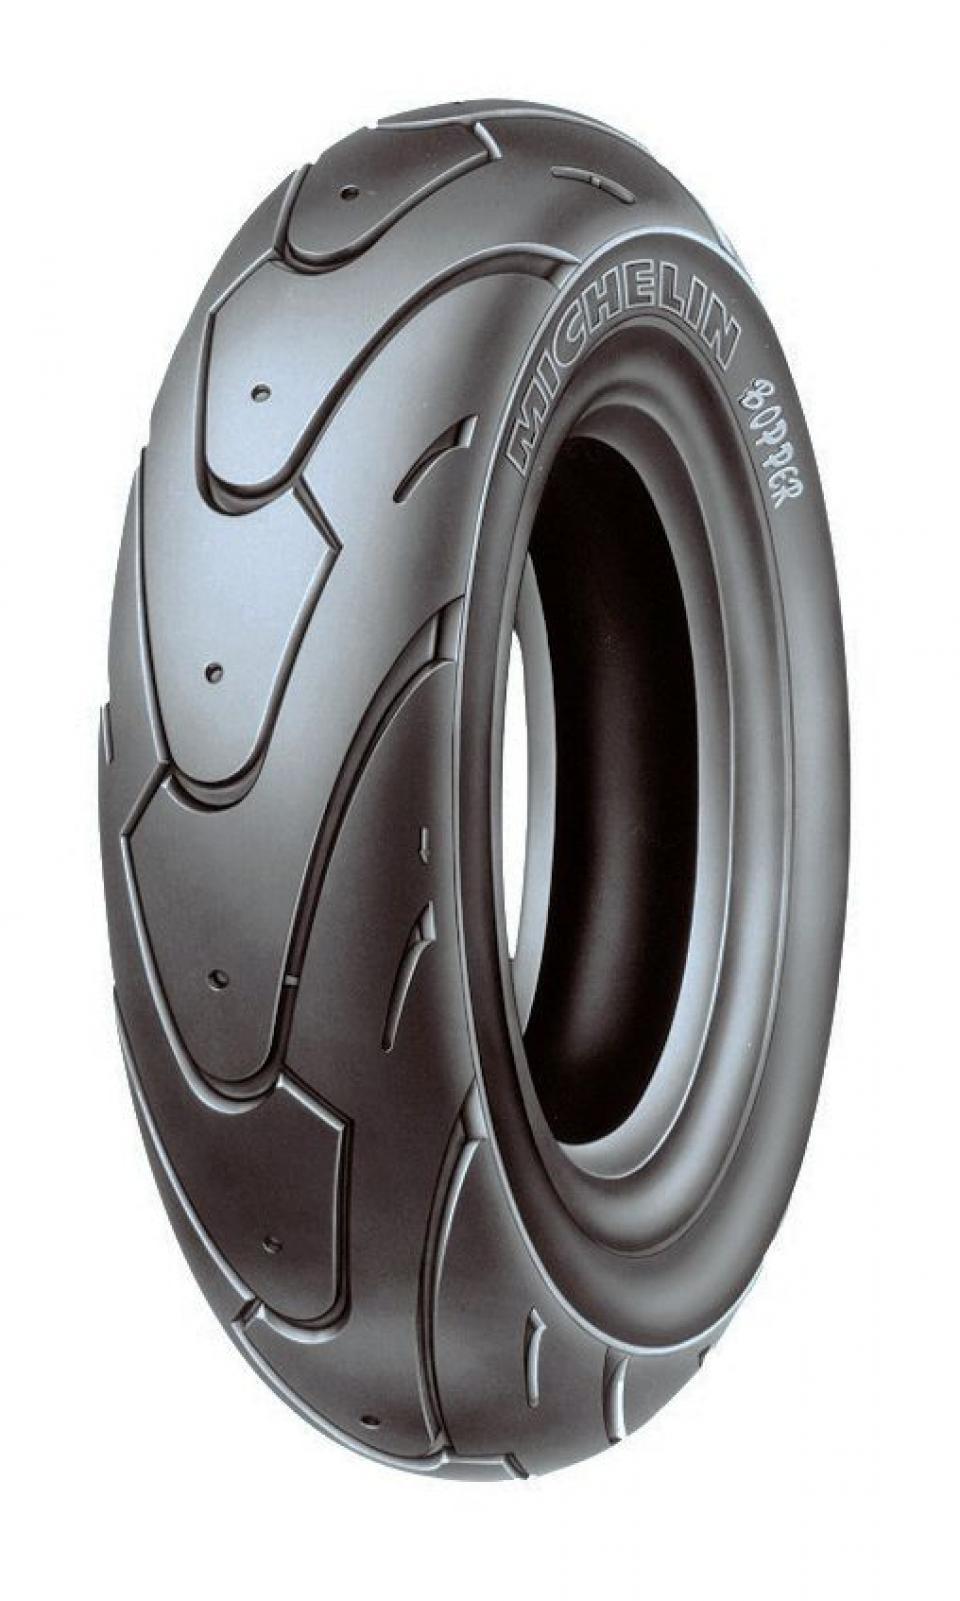 Pneu 130-90-10 Michelin pour Scooter MBK 50 Booster One 2013 à 2017 Neuf